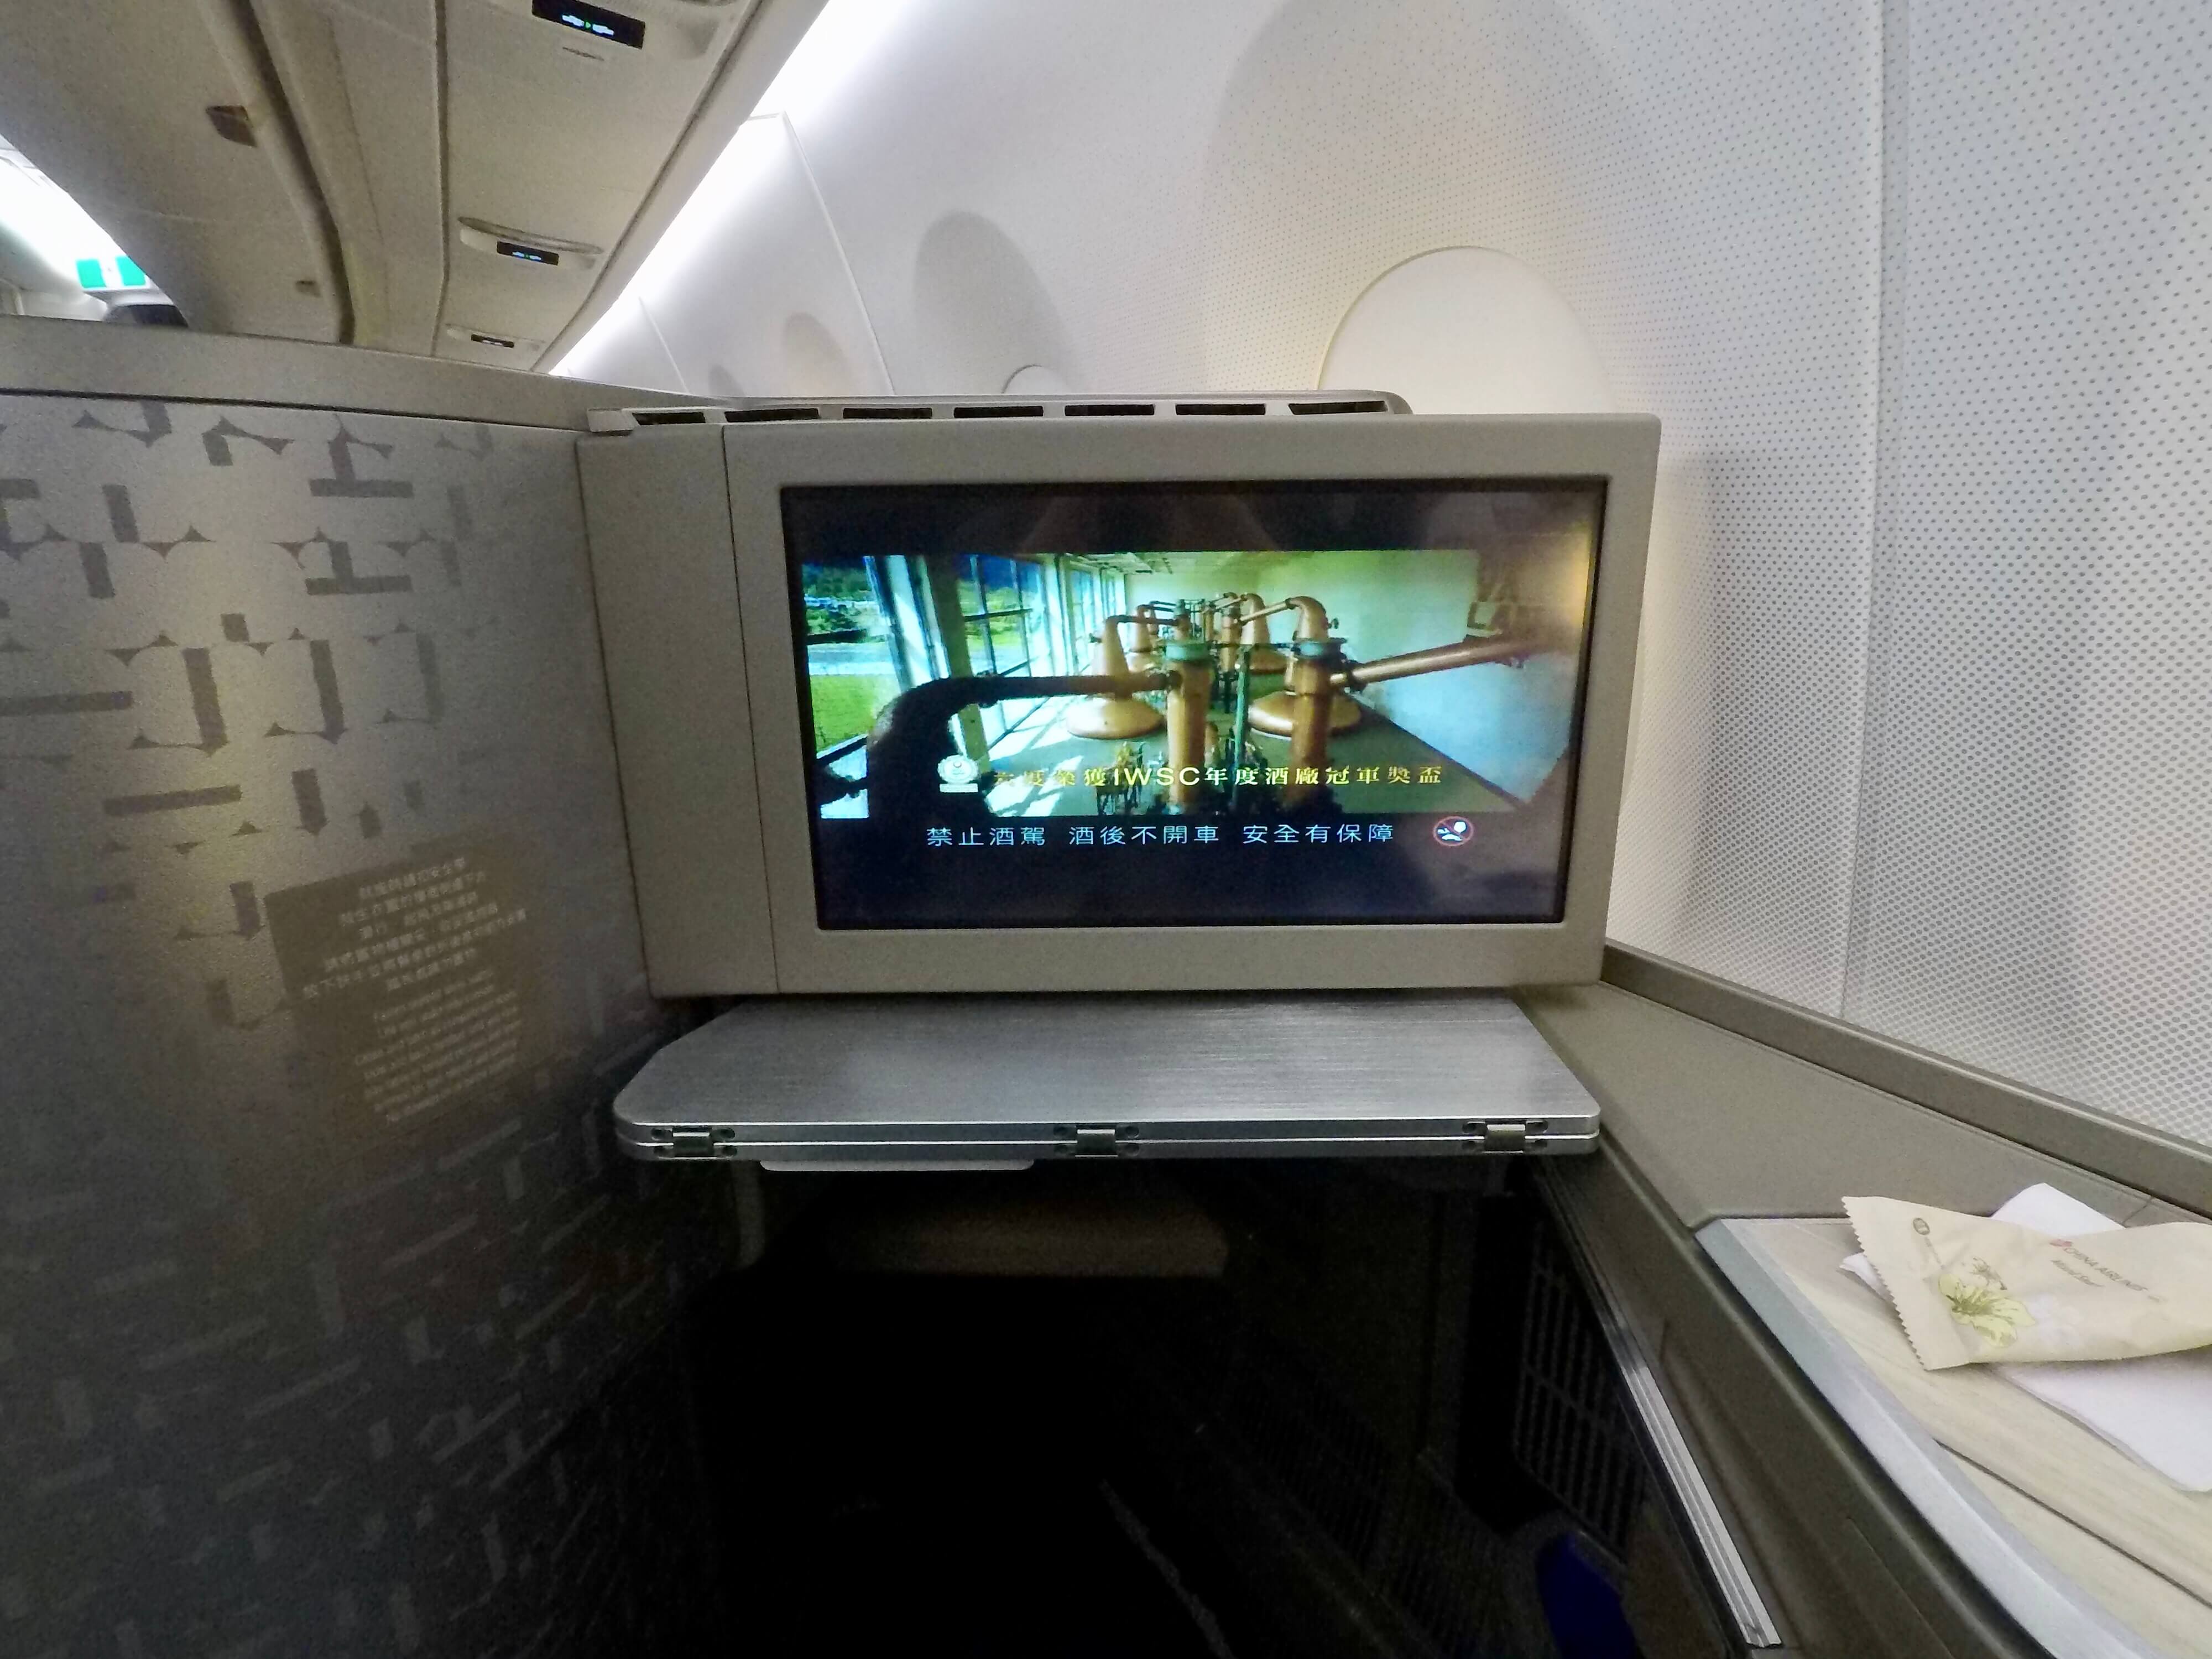 Luxurious Travel A350 China Airlines Business Class Upon Boarding